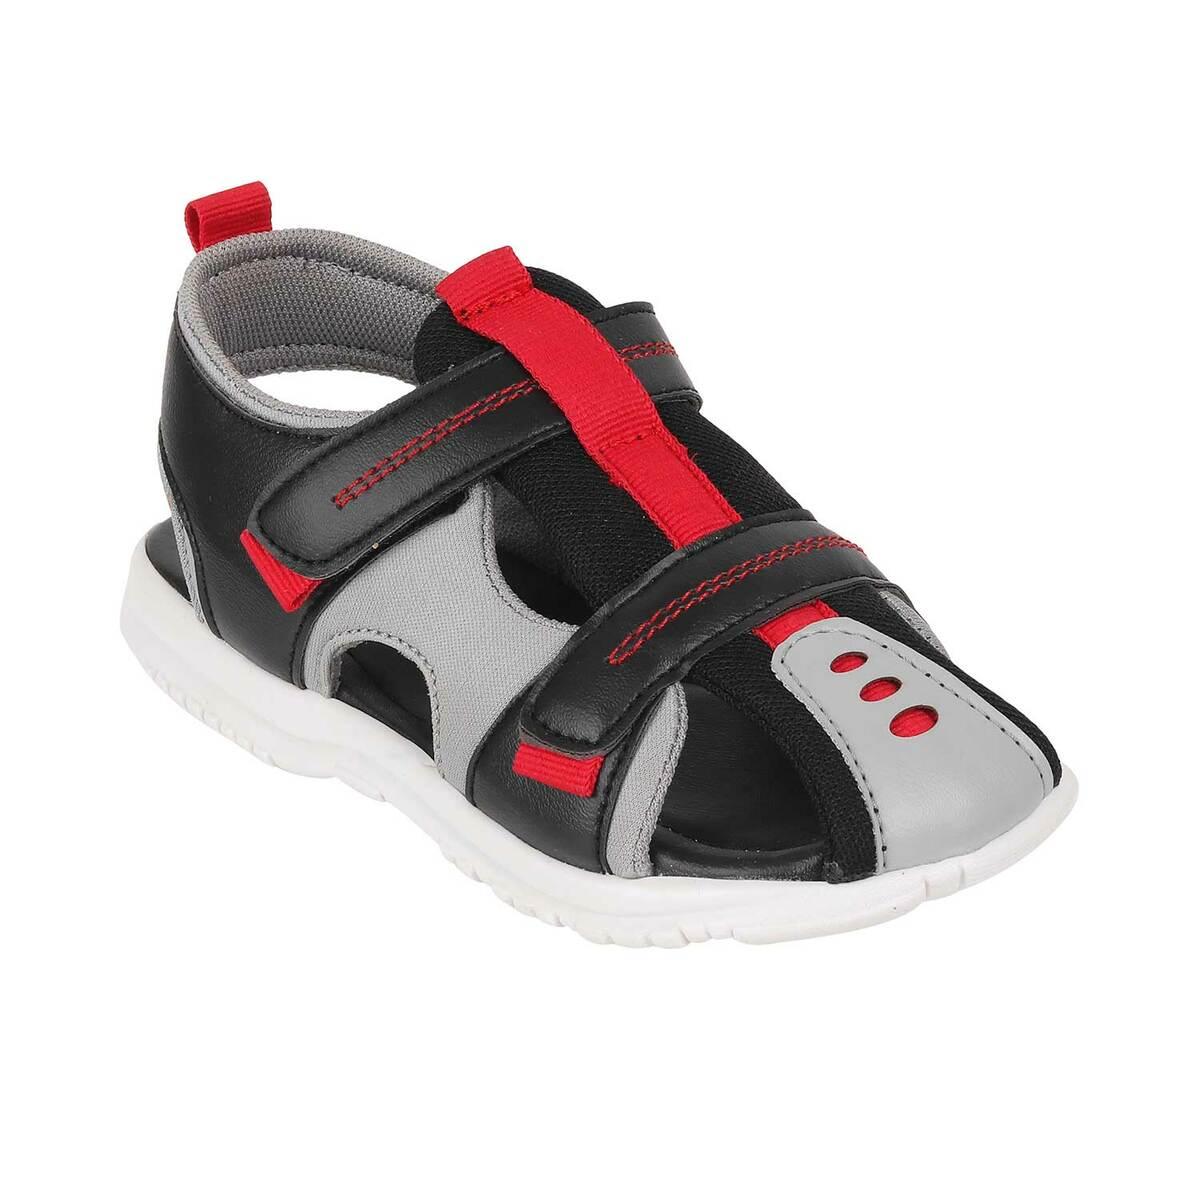 Buy Kids Sandals, Masai Sandals, Boys Sandals, African Sandals, Maasai  Sandals, Leather Sandals, Children Sandals, Gift for Him, Male Sandals  Online in India - Etsy